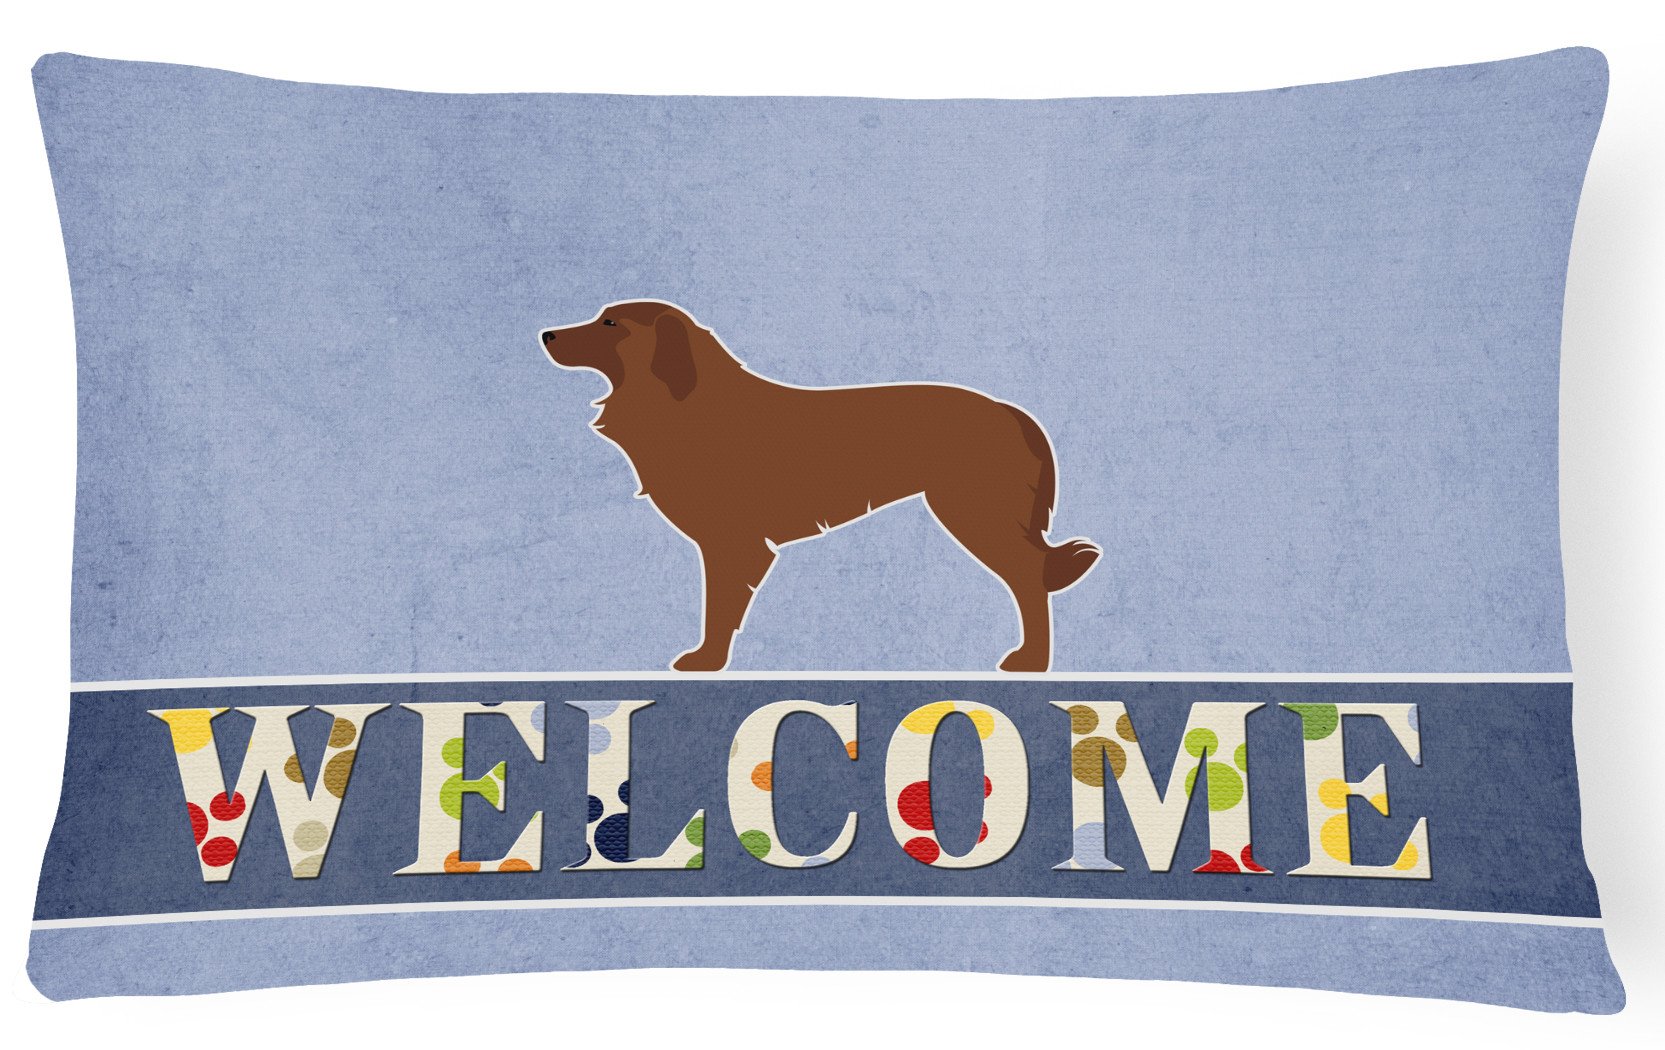 Portuguese Sheepdog Dog Welcome Canvas Fabric Decorative Pillow BB5535PW1216 by Caroline's Treasures